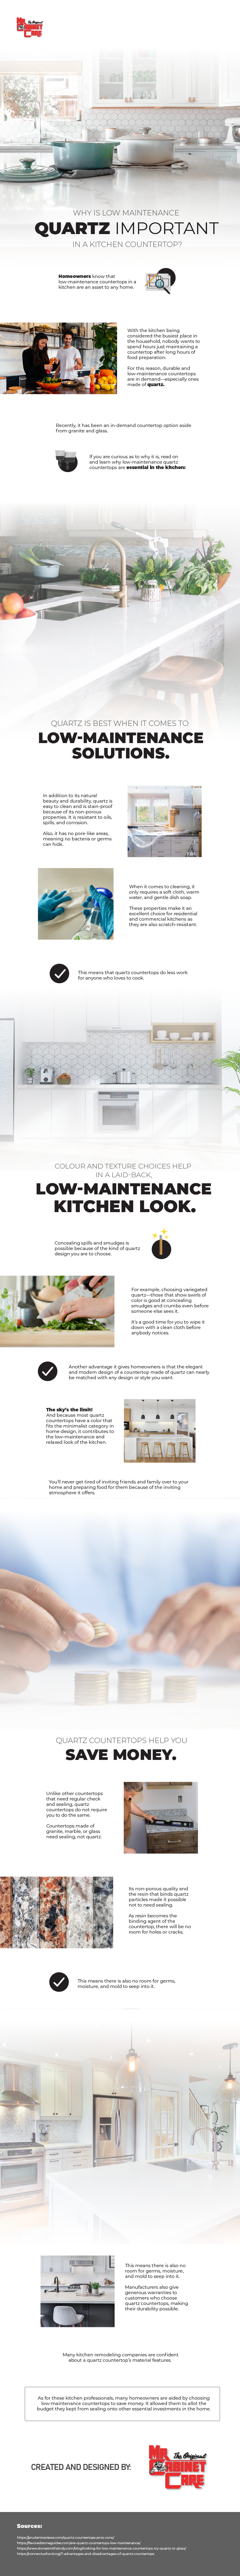 Why is Low Maintenance Quartz Important in a Kitchen Countertop?